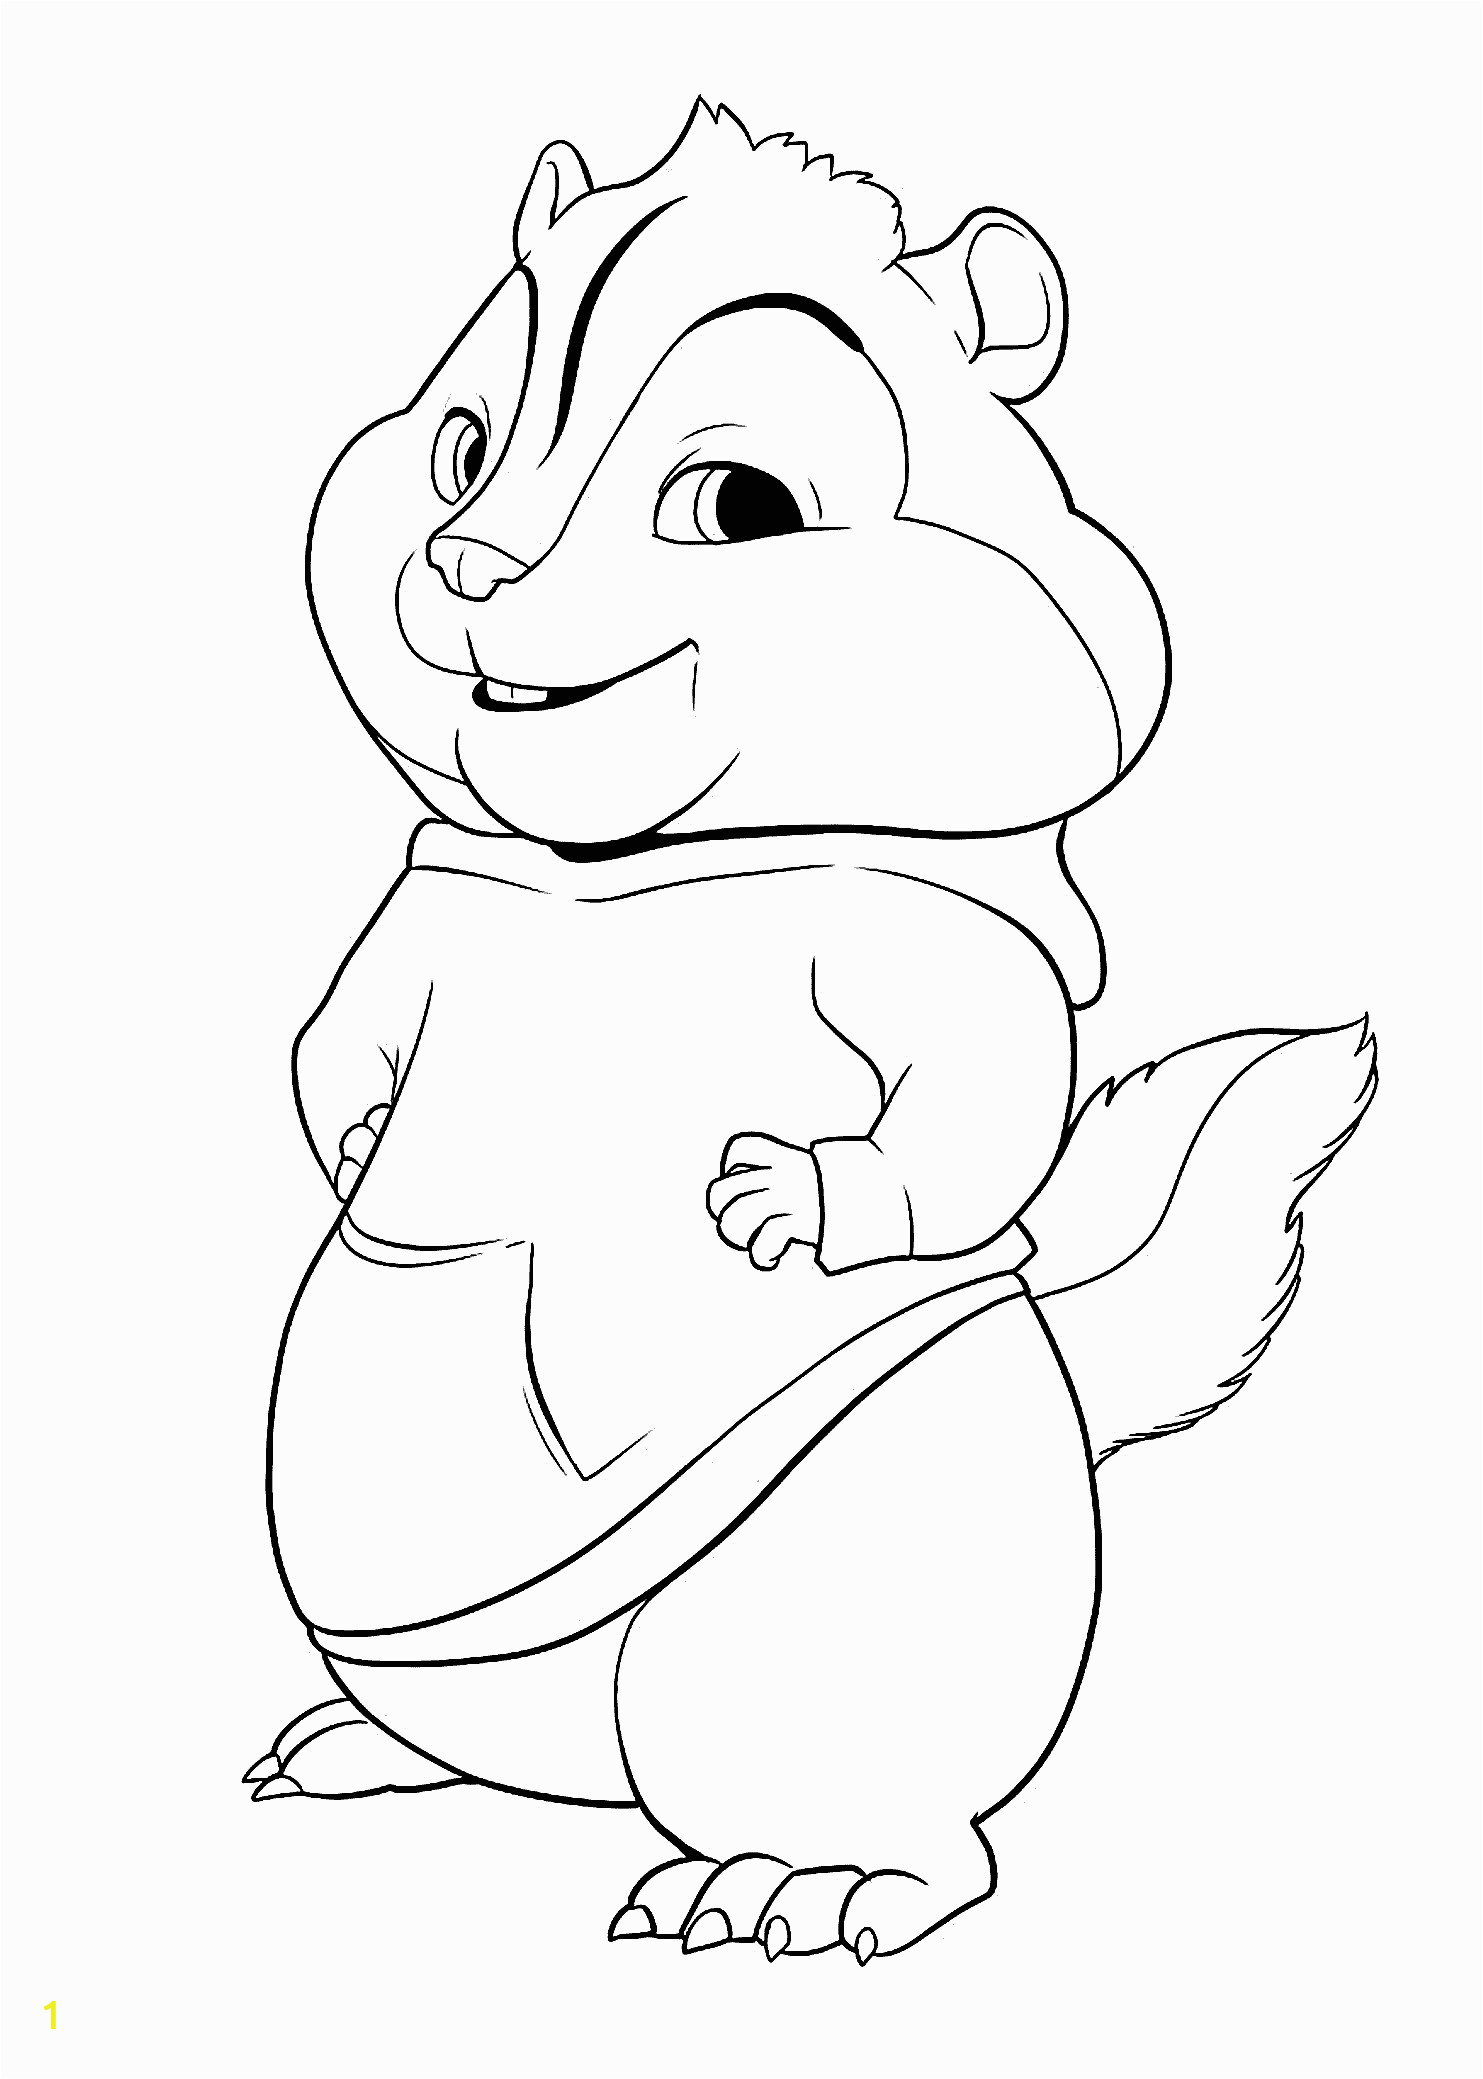 chipmunk coloring pages to print